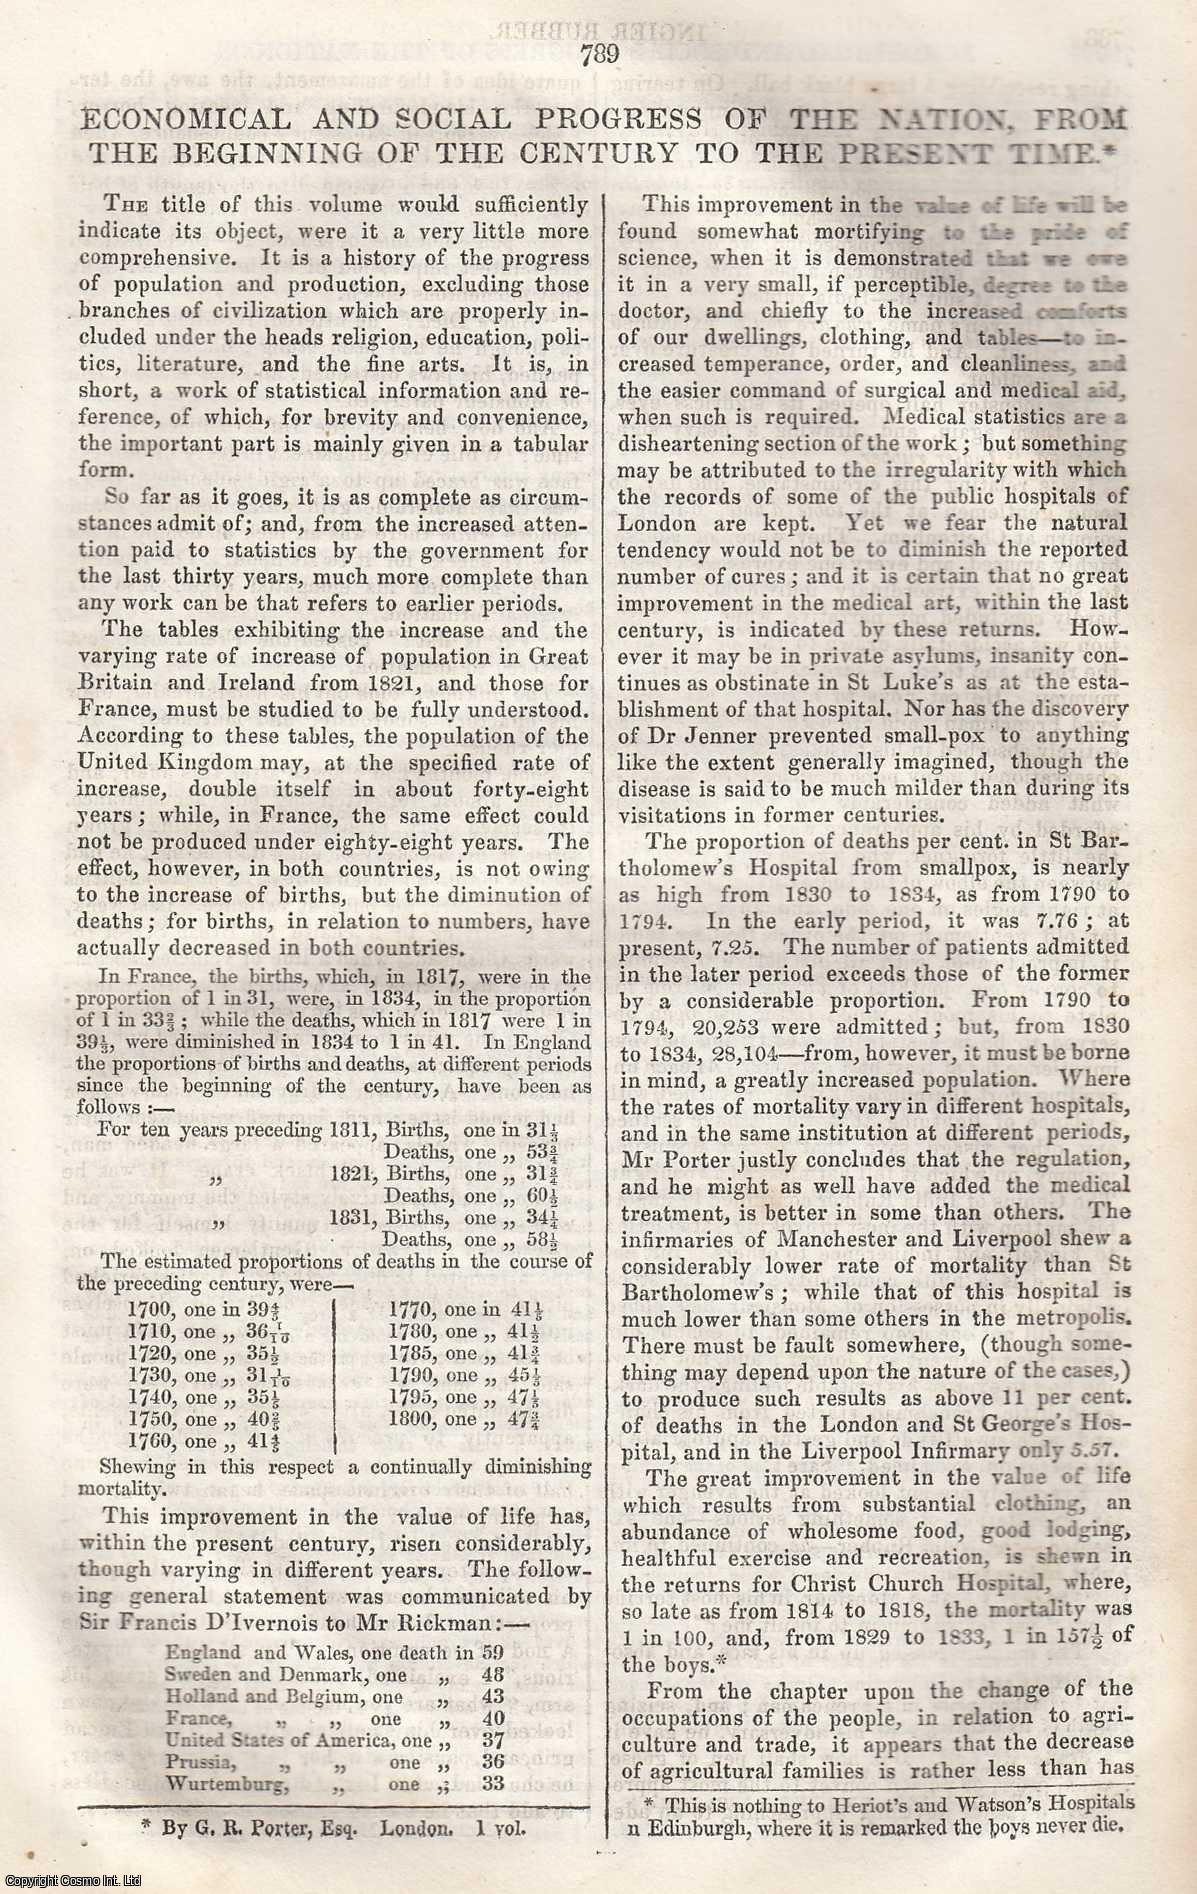 No Author Stated - Economical and Social Progress of The Nation. An original article from Tait's Edinburgh Magazine, 1836.